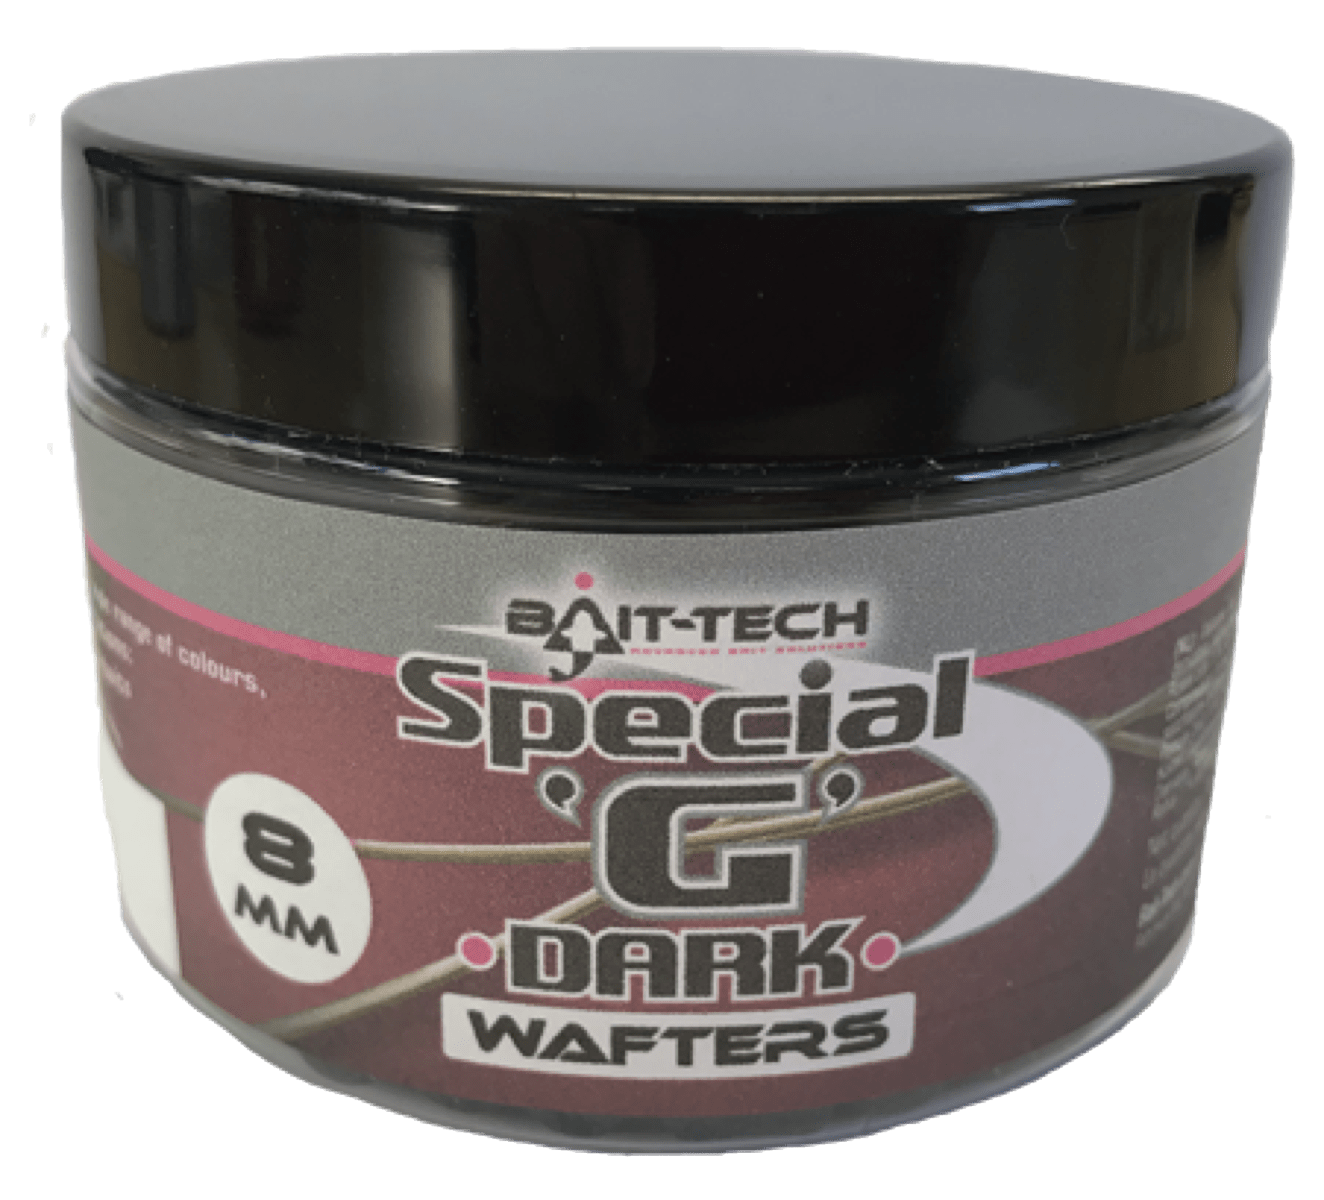 Bait-Tech special G dumbell wafters 8mm dark